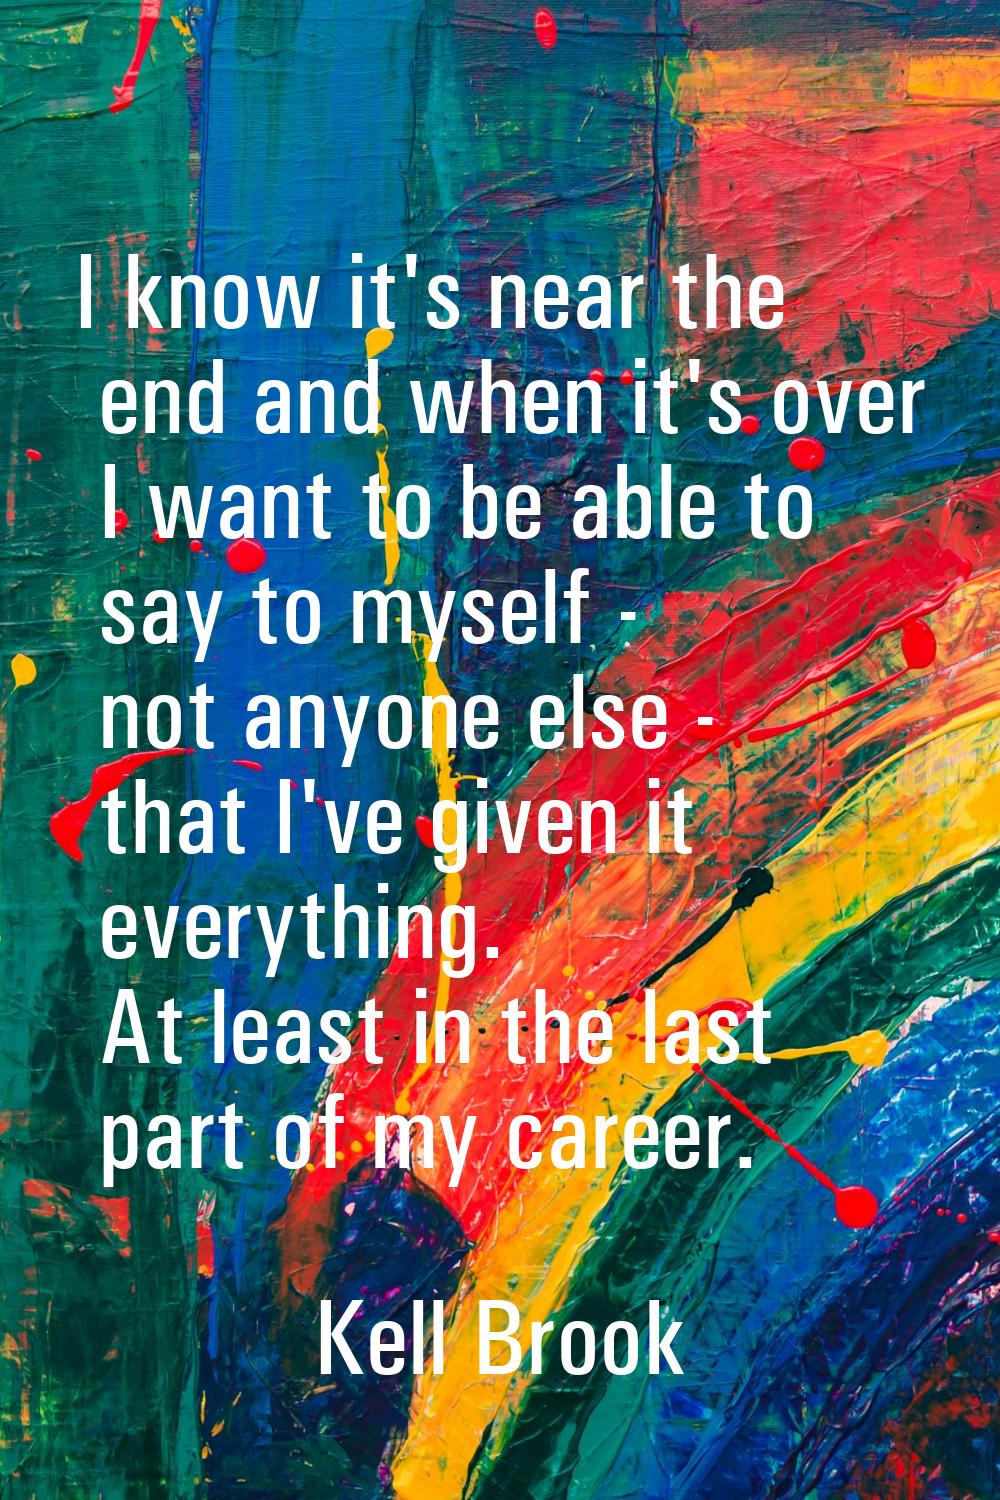 I know it's near the end and when it's over I want to be able to say to myself - not anyone else - 